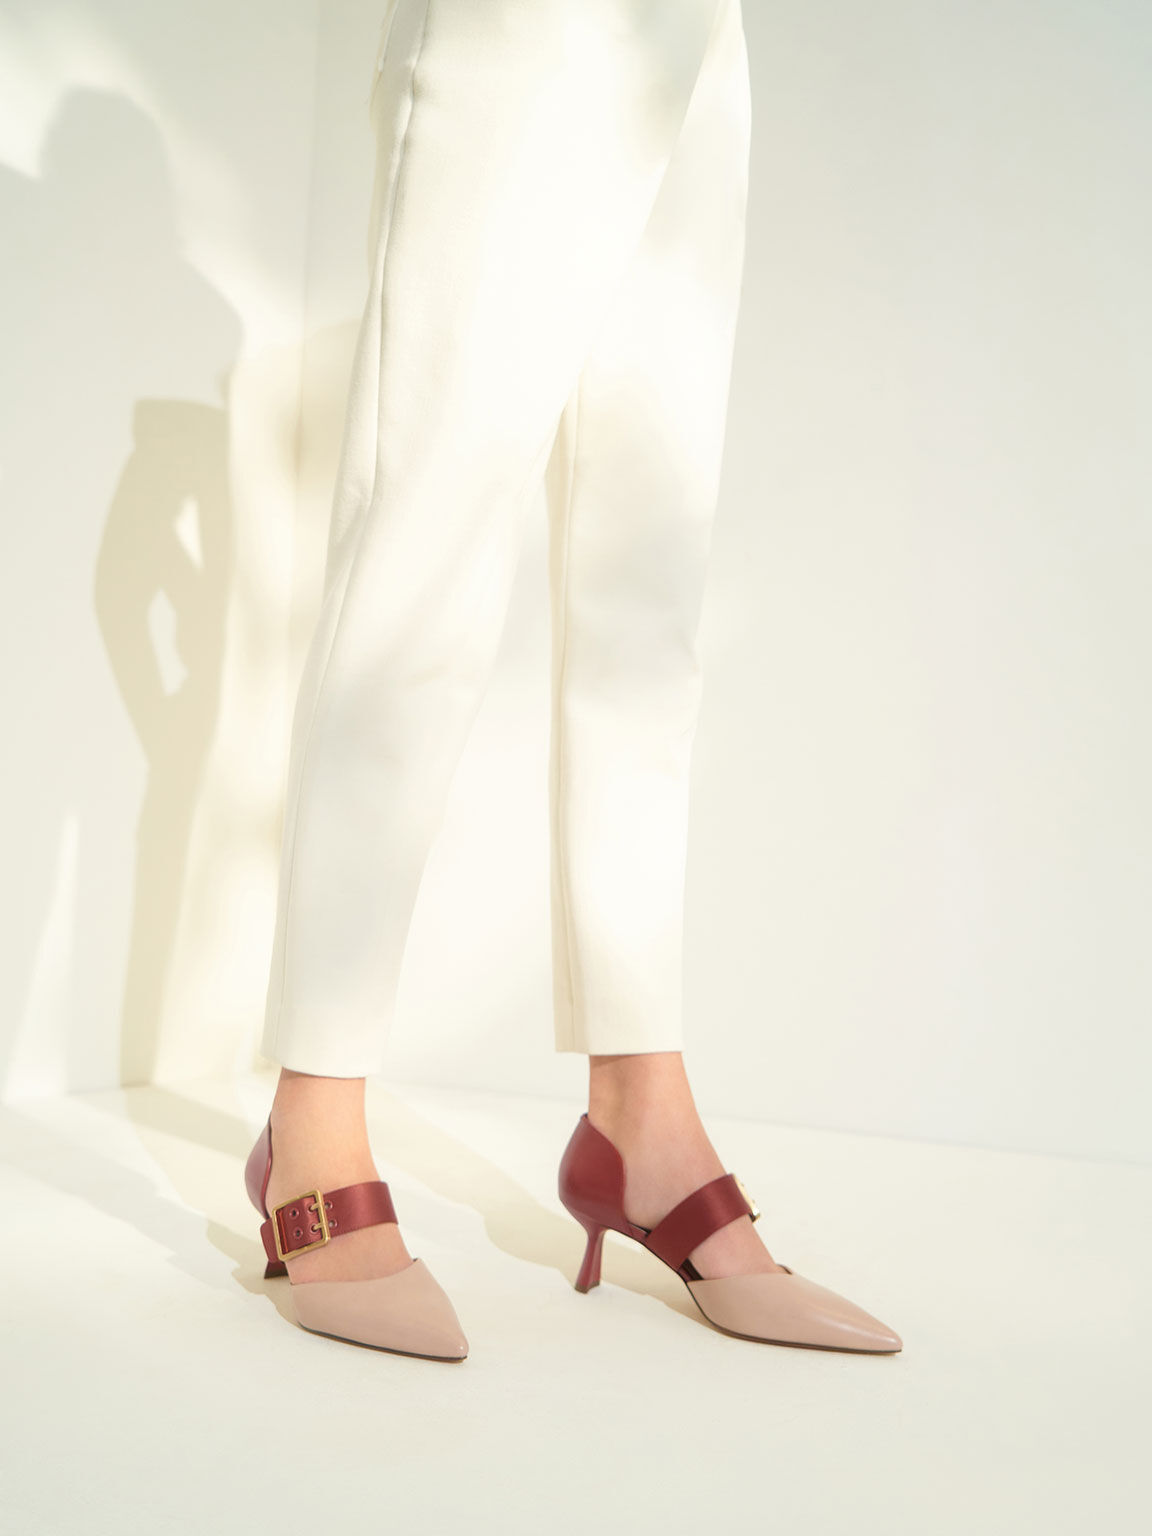 Oversized Buckle Pointed Toe Pumps, Brick, hi-res